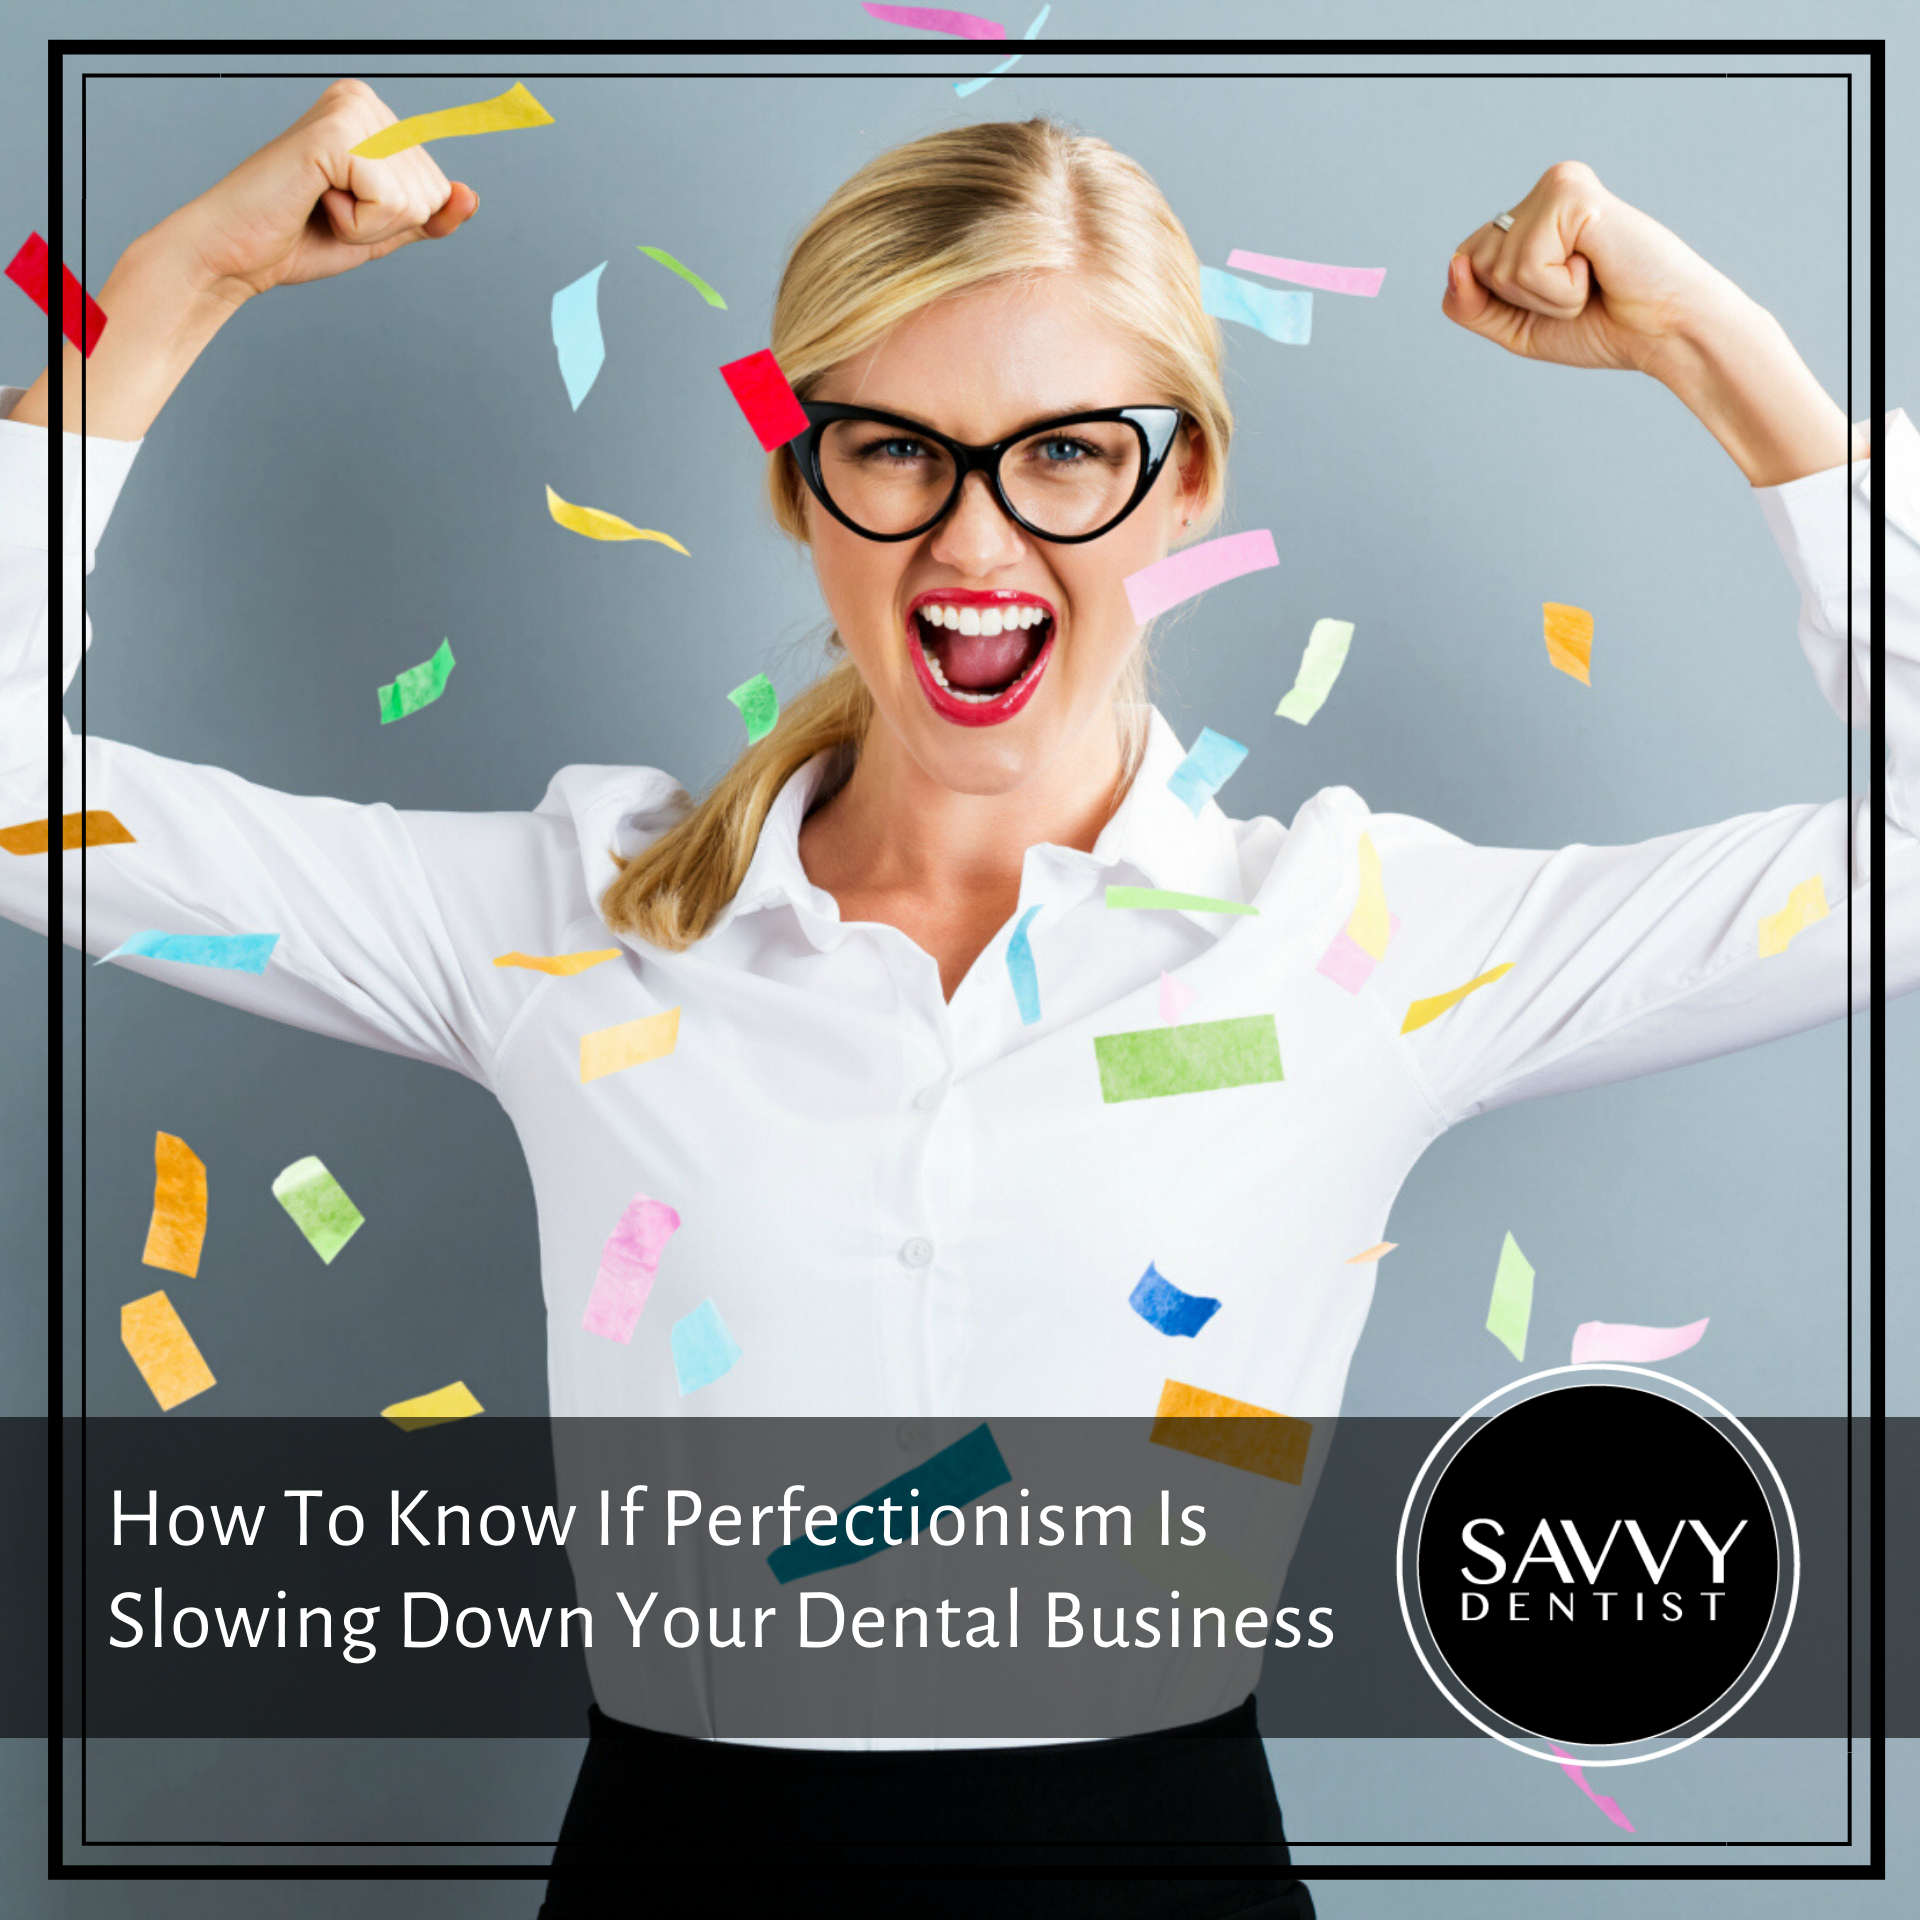 How To Know If Perfectionism Is Slowing Down Your Dental Business